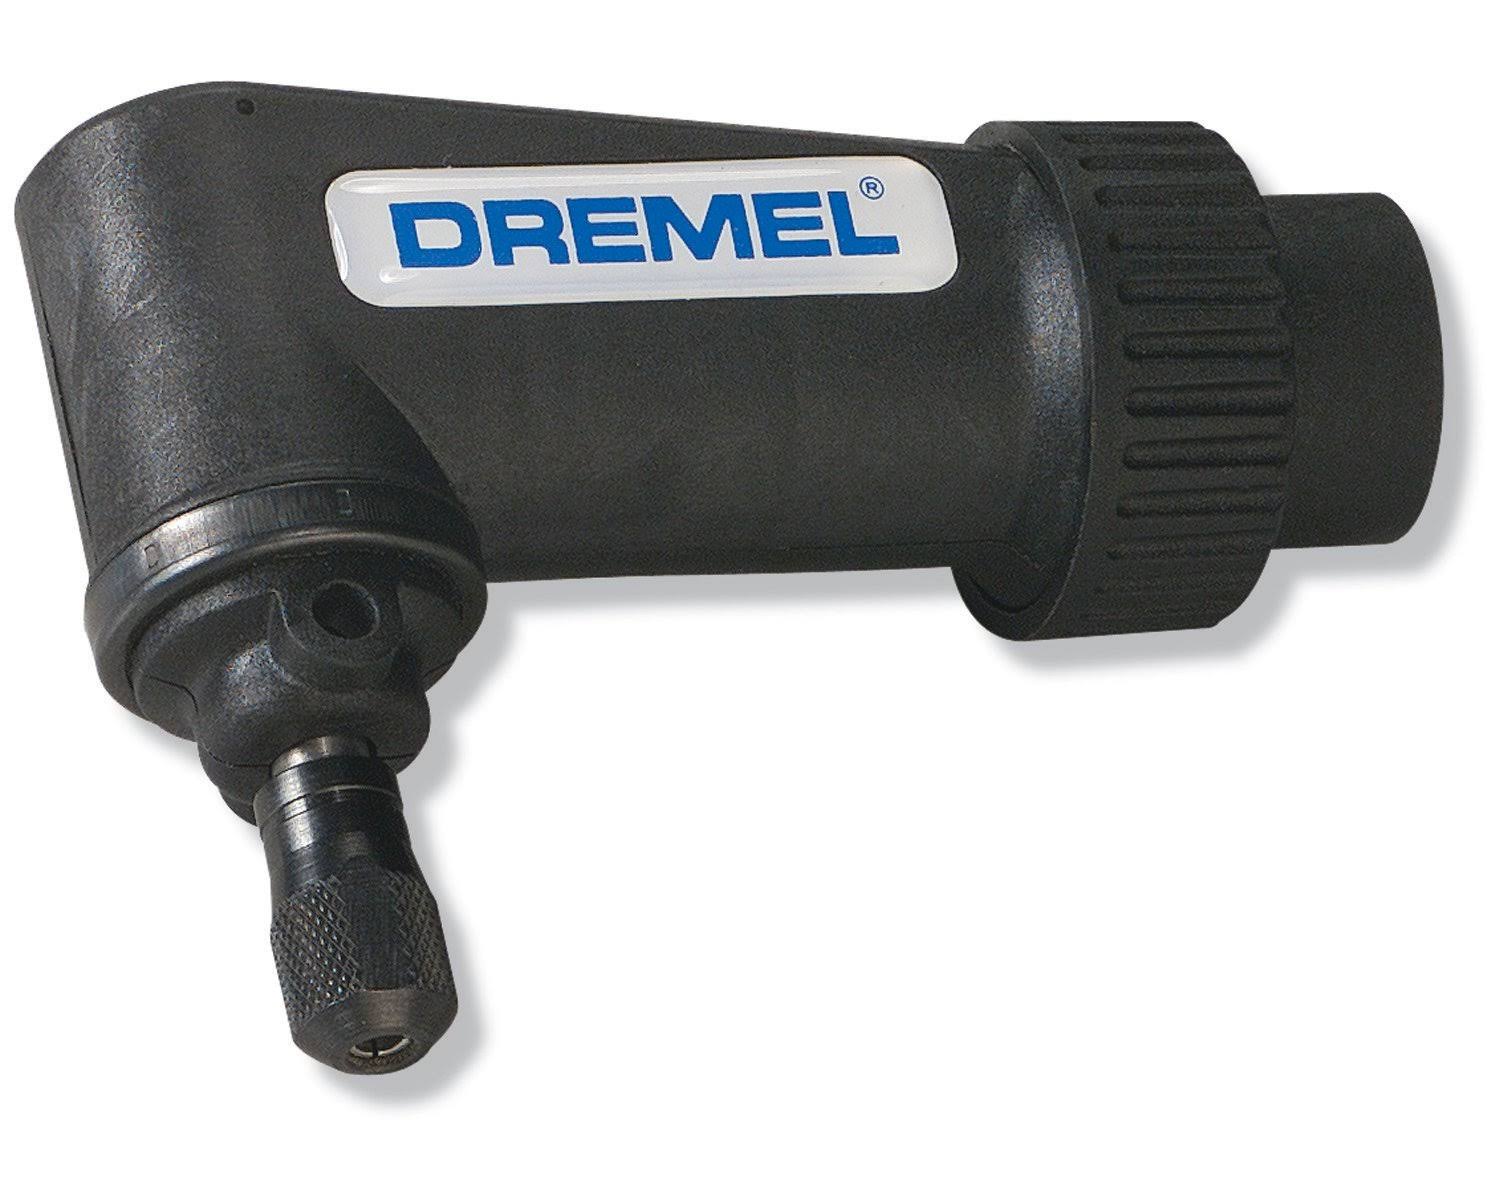 Dremel 575 Right Angle Attachment for Rotary Tool - 4"